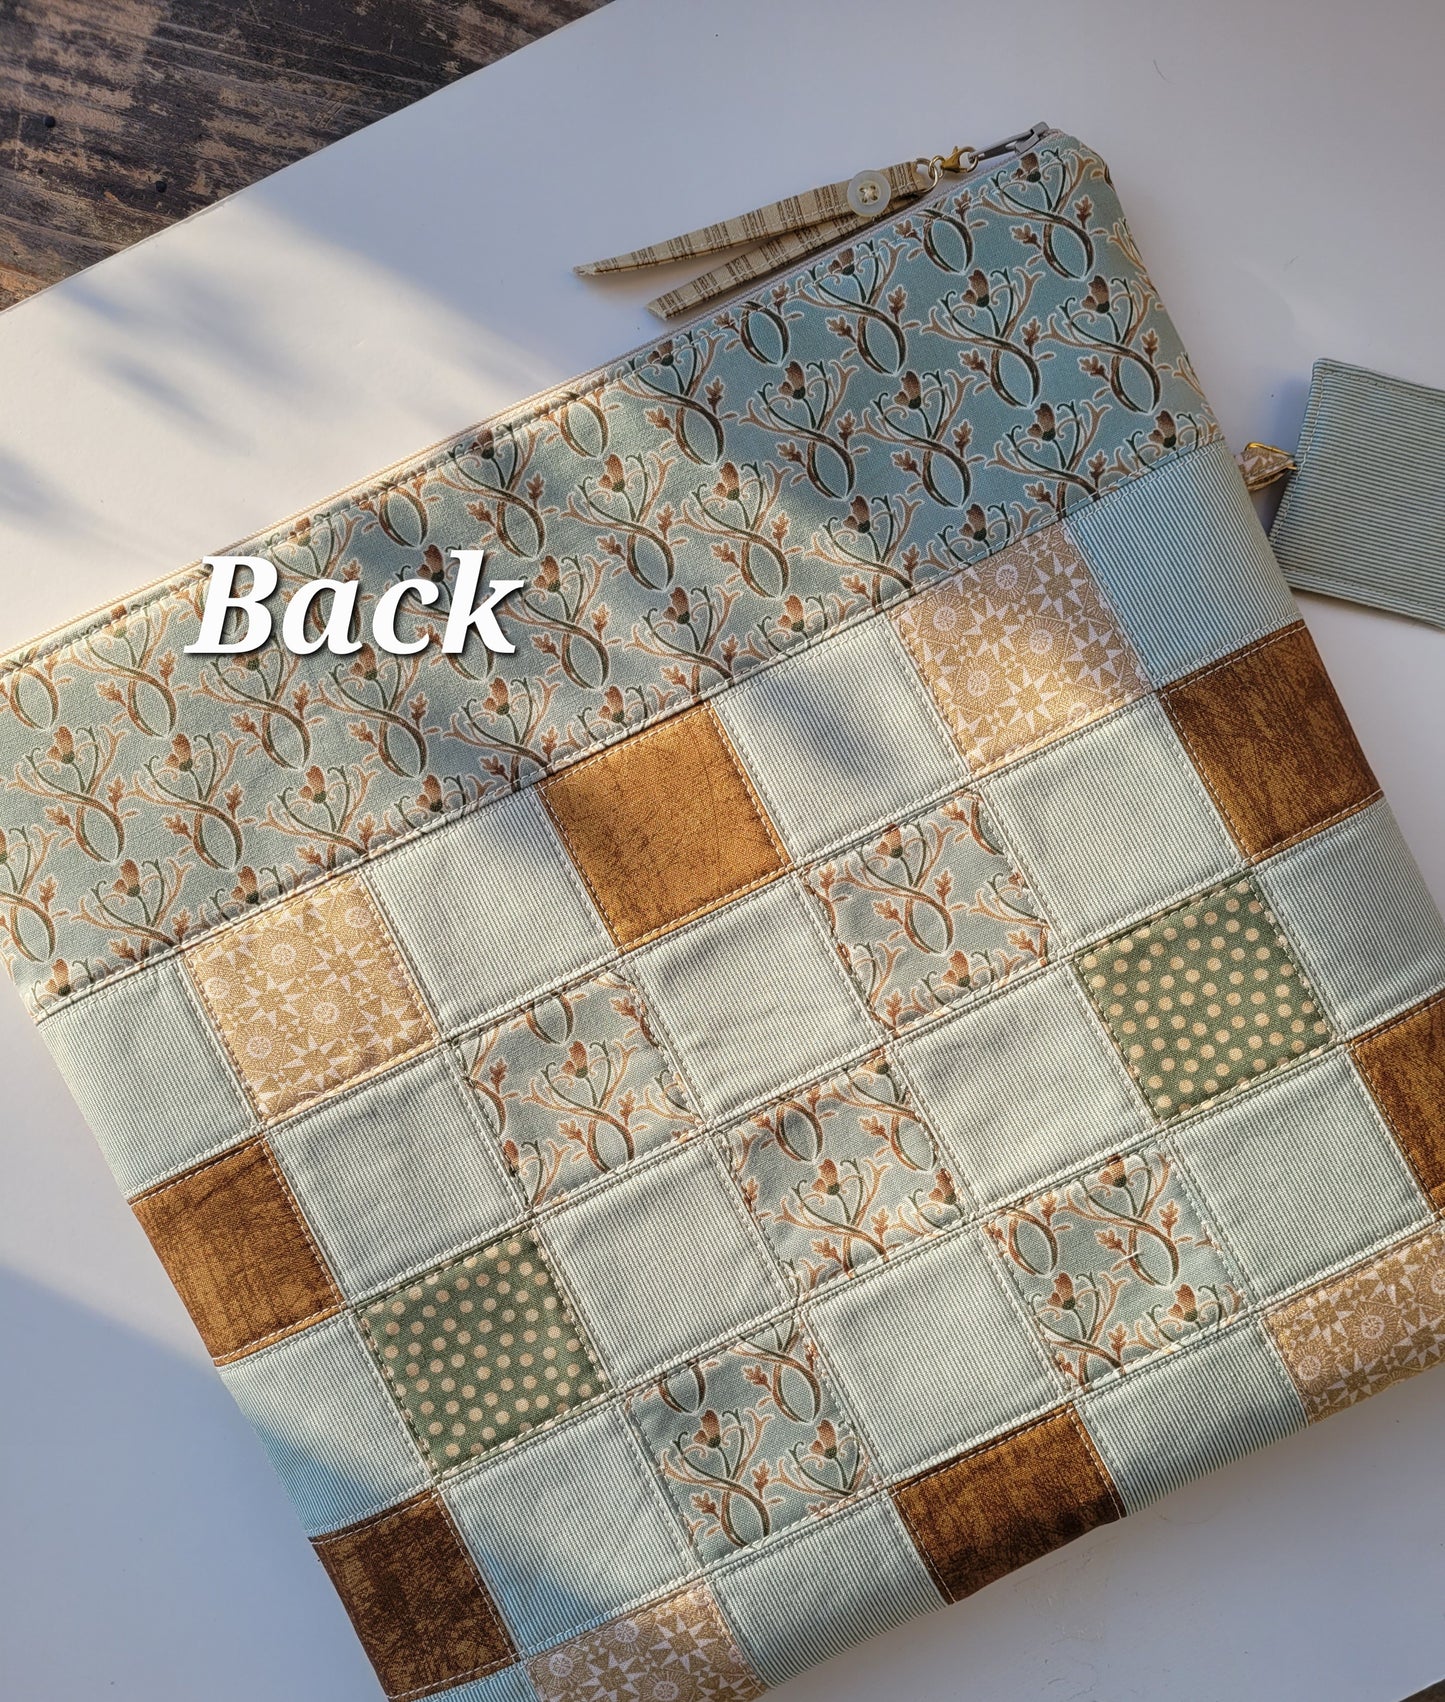 2024 Patchwork Bag of the Month Club by Jenni Stitching Simply